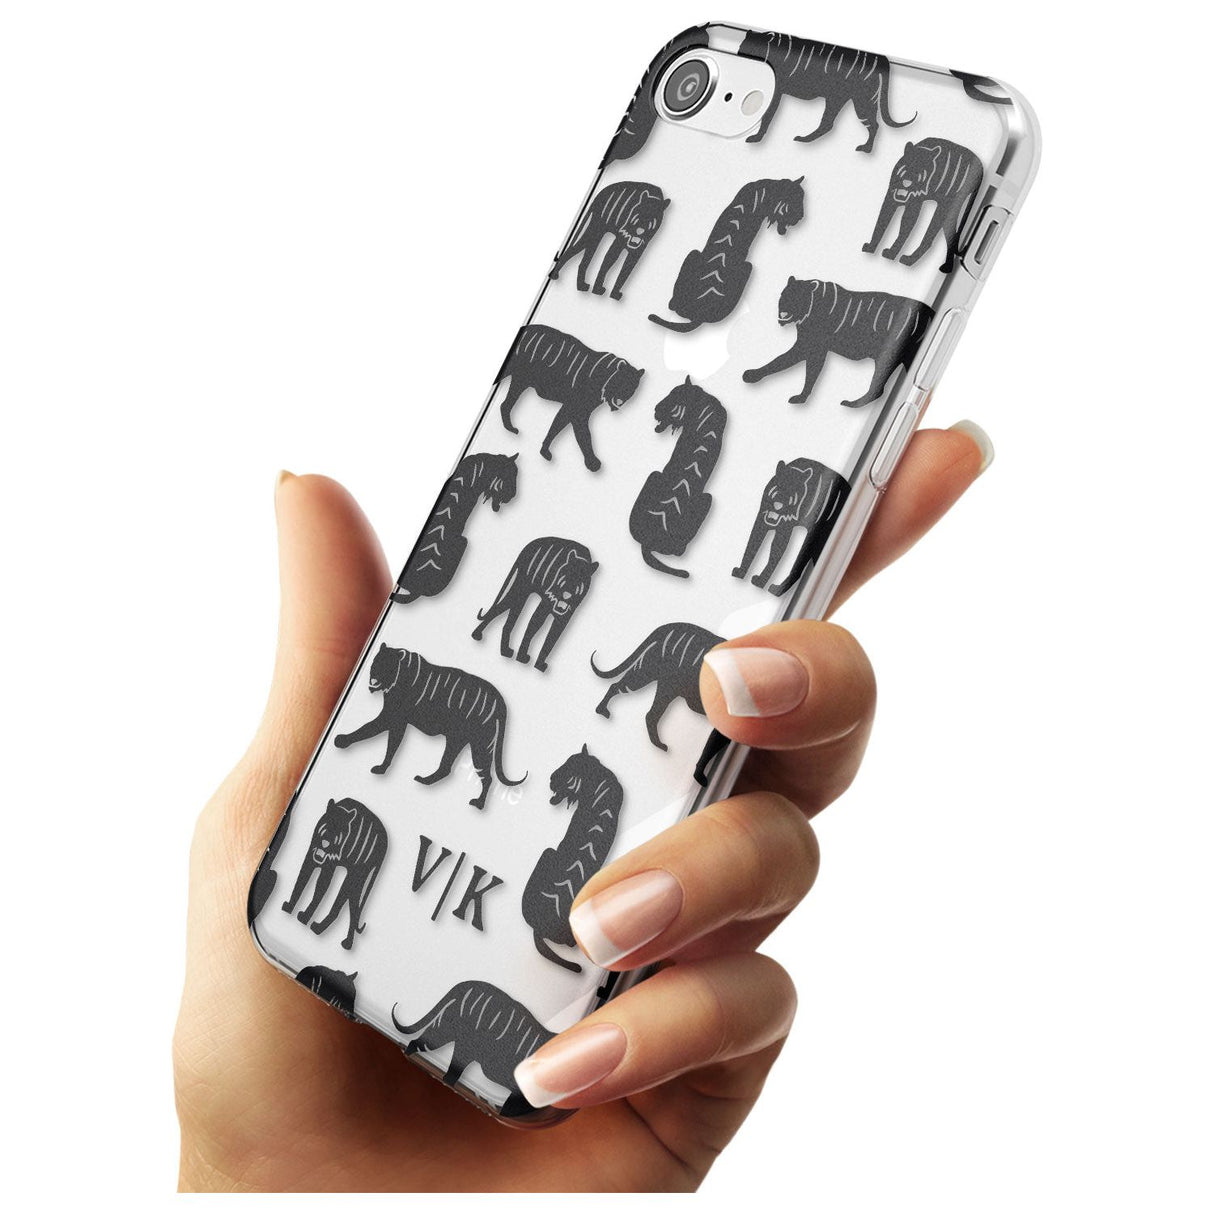 Tiger Silhouettes iPhone Case   Custom Phone Case - Case Warehouse